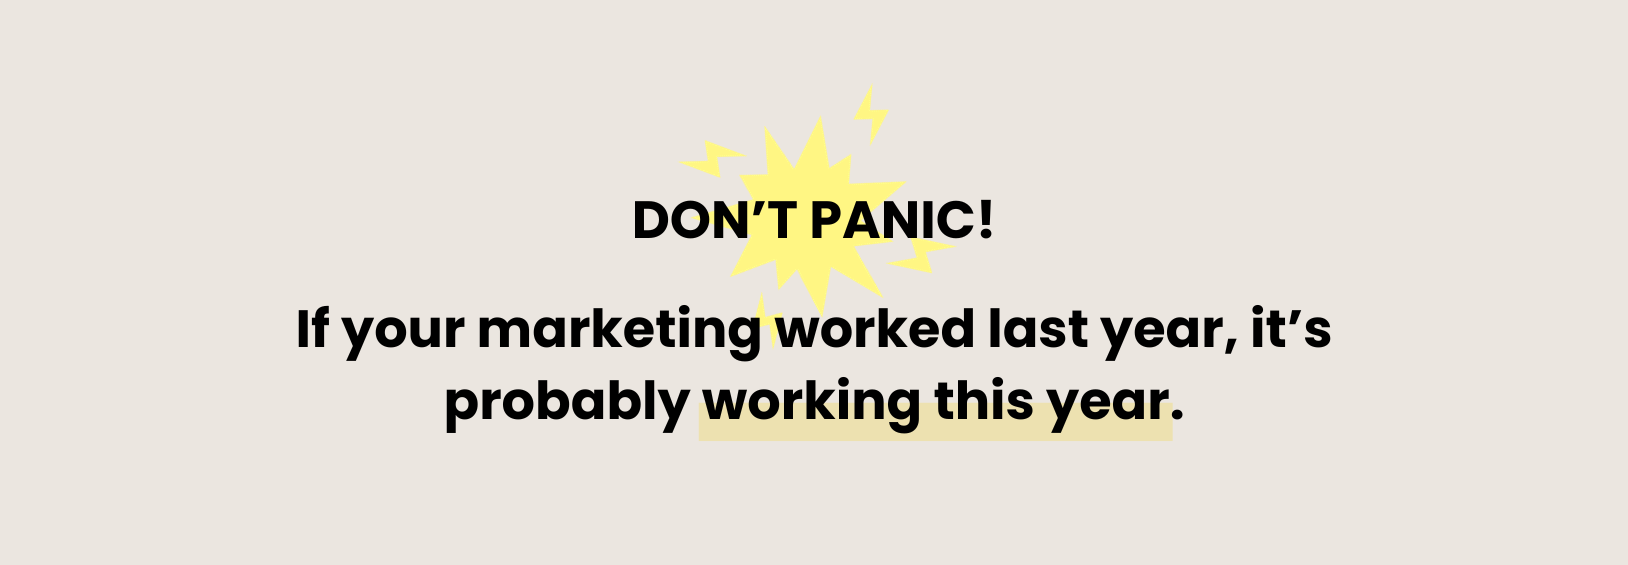 Don't panic! If your marketing worked last year, it's probably working this year.